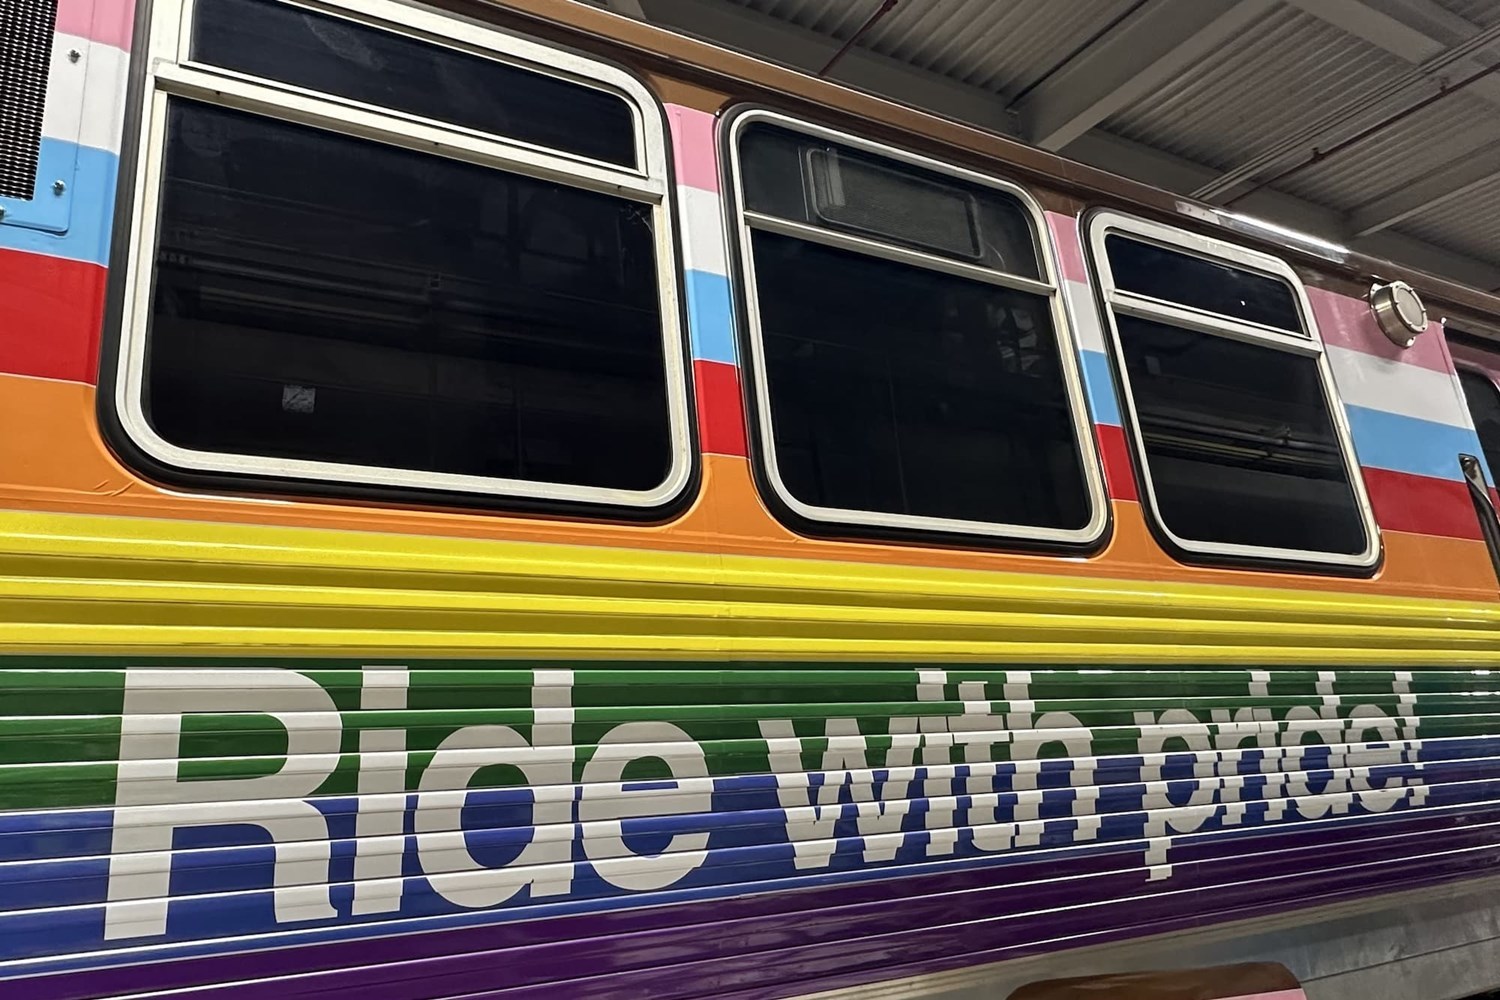 The words "ride with pride" printed on the pride train